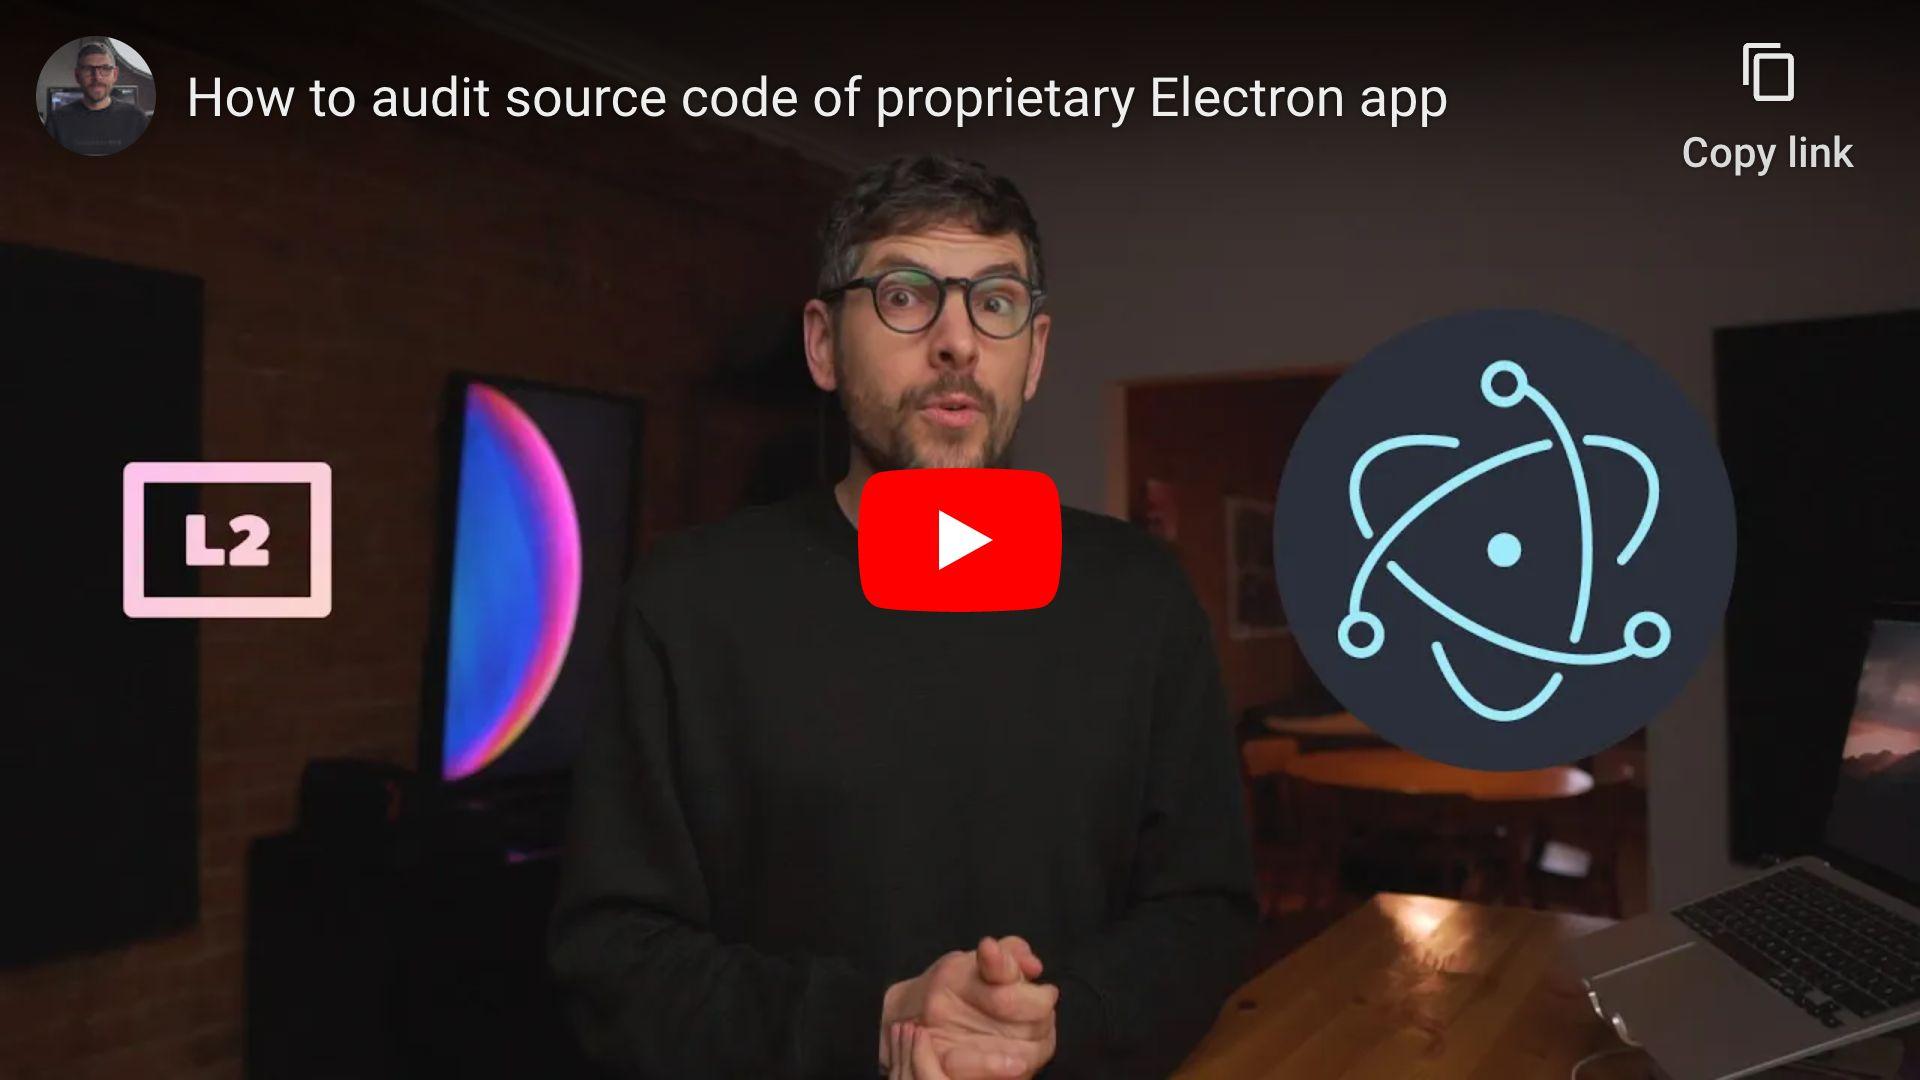 How to audit source code of proprietary Electron app